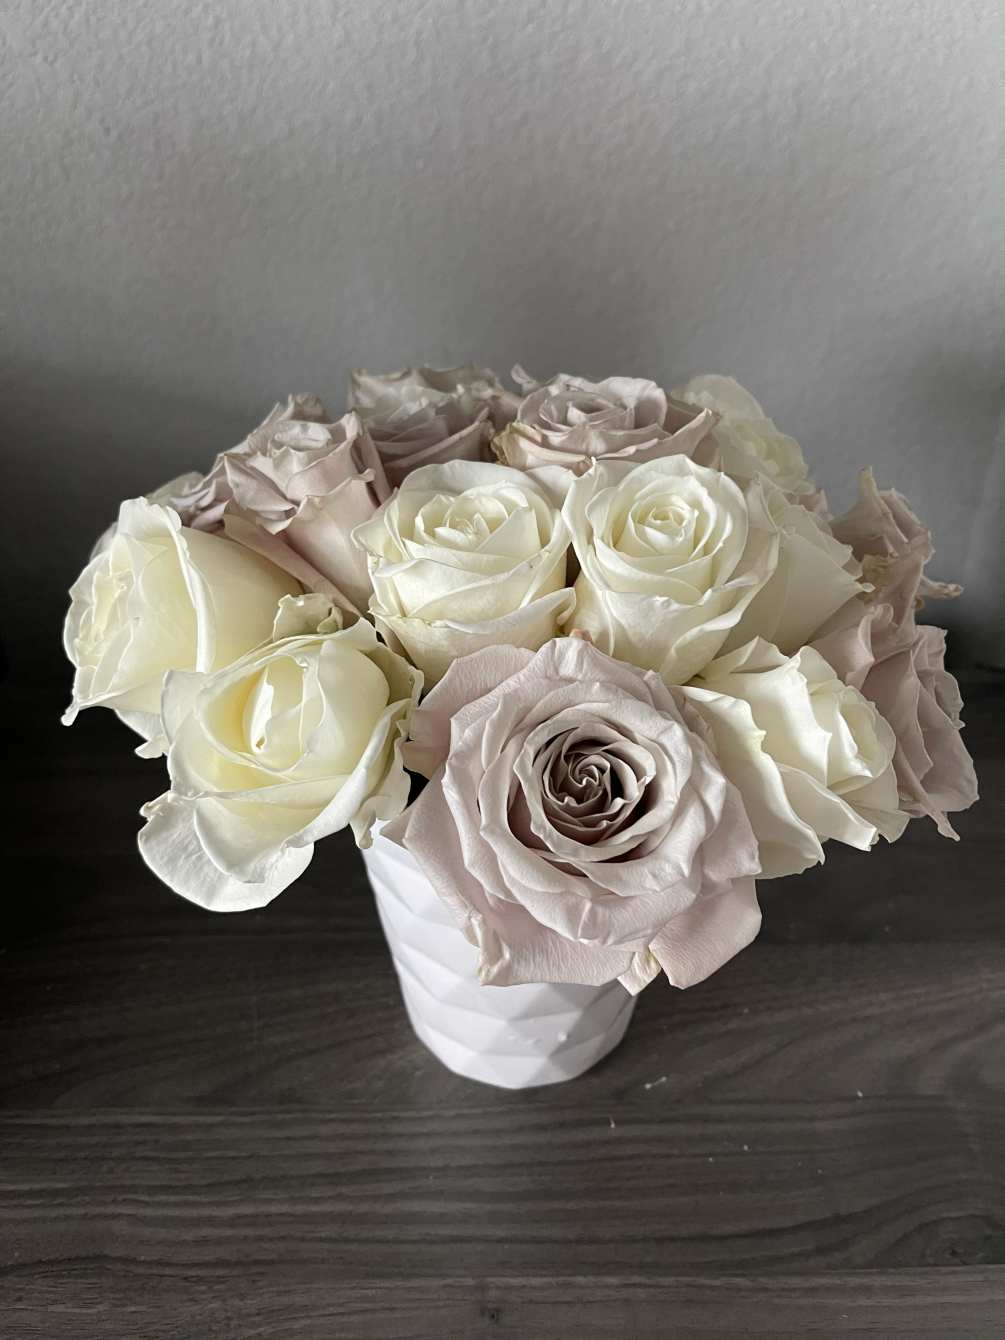 20-22 light color roses. White, off white or light pink will be